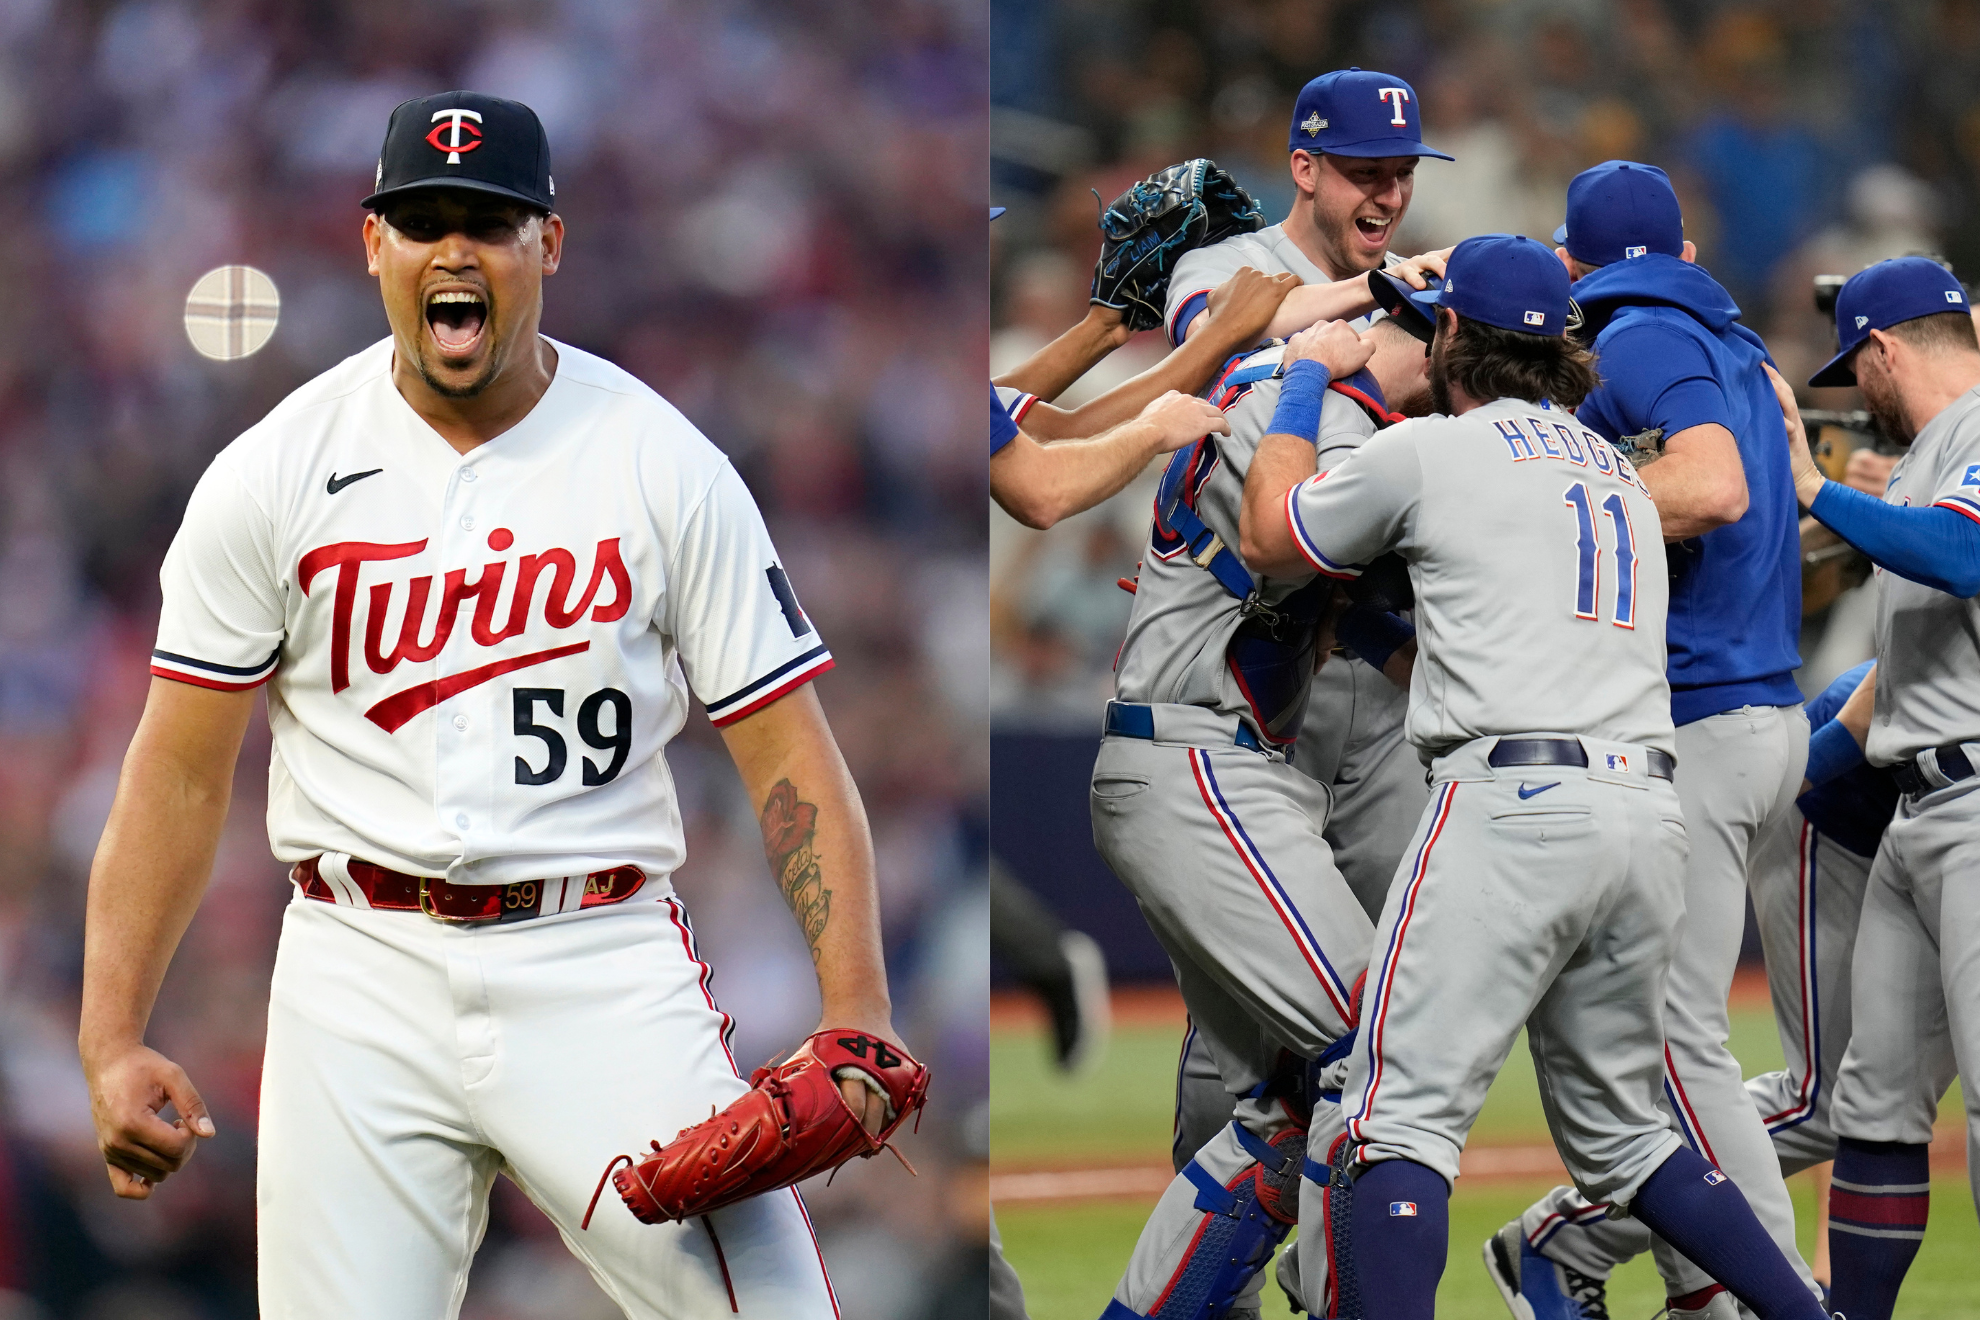 The Minnesota Twins and Texas Rangers are heading to the ALDS.